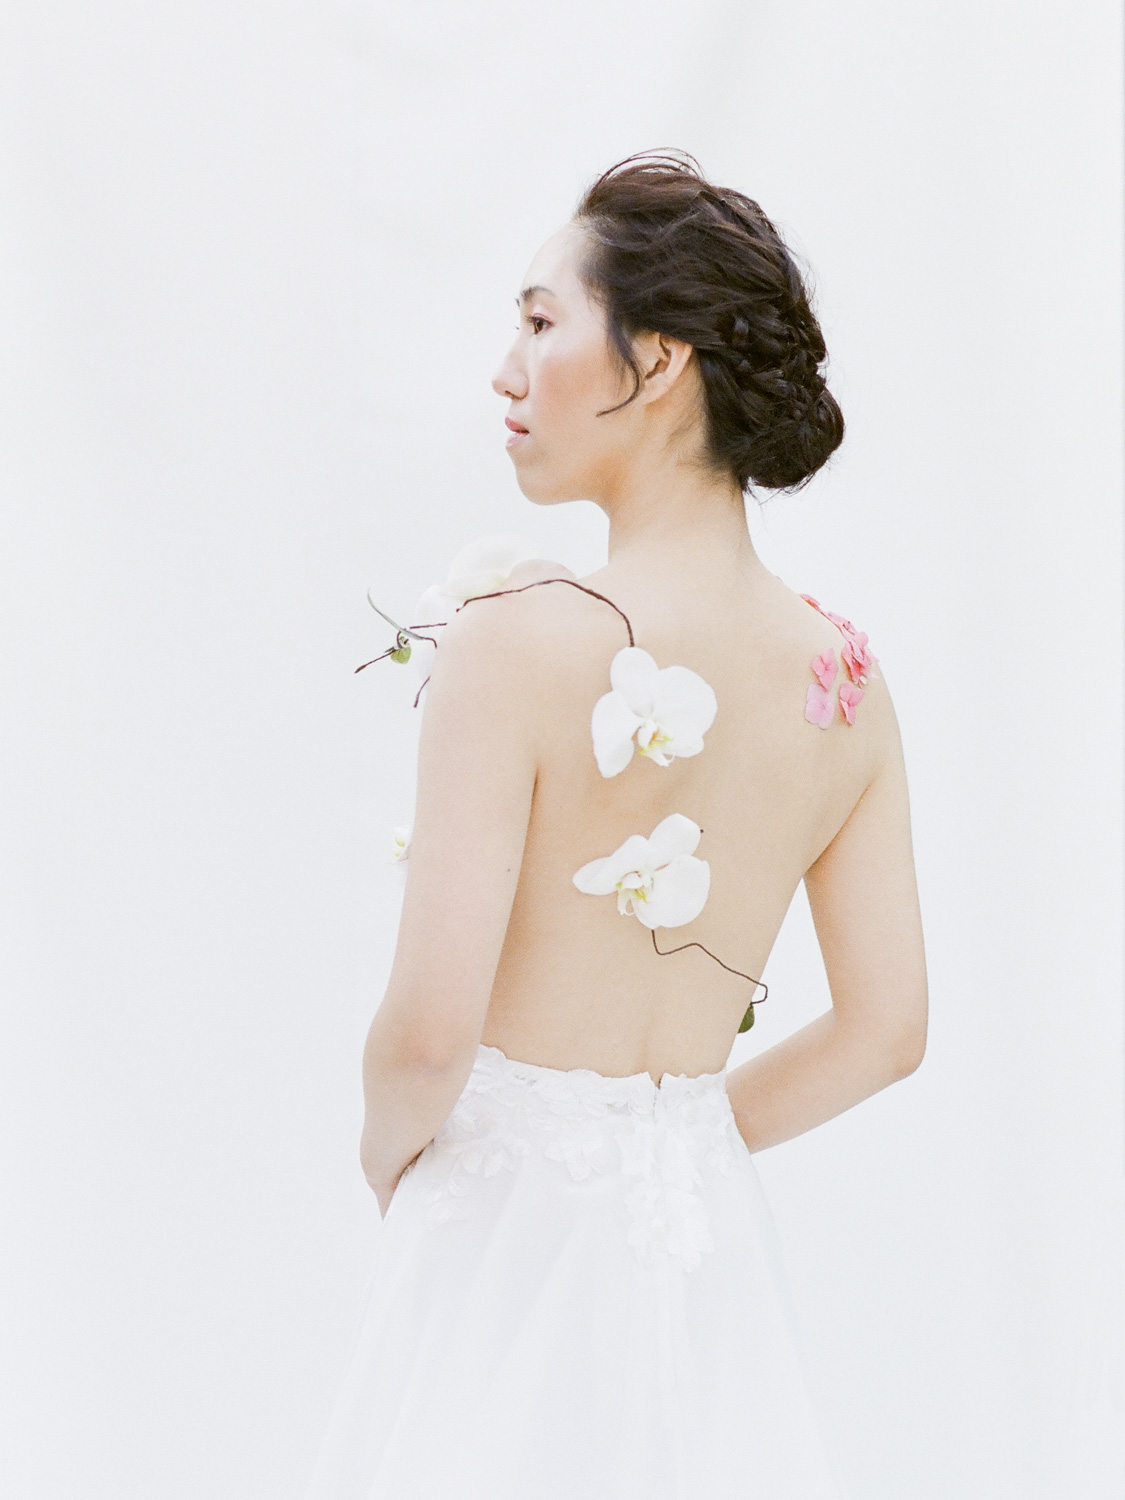 By Bhavika Bridal fashion summer pink hydrangeas and white orchids